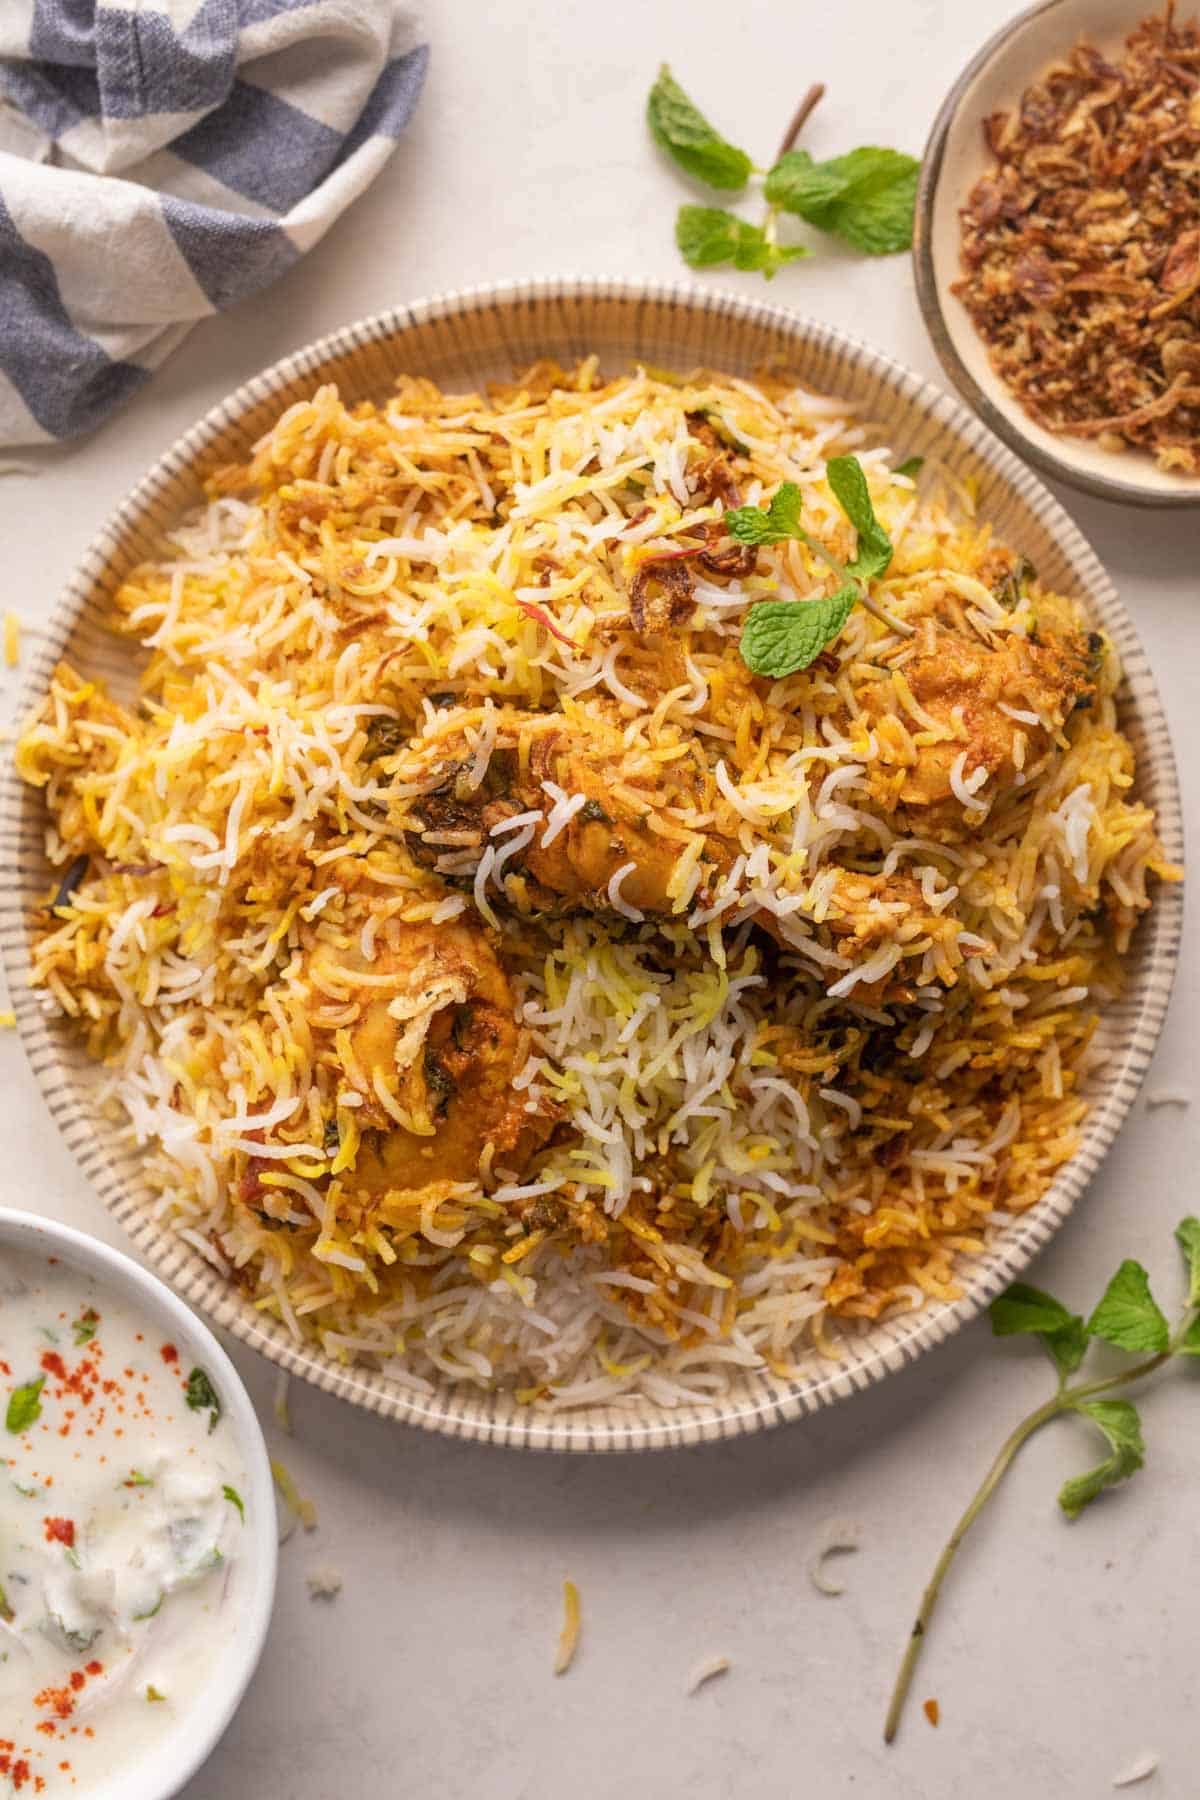 Chicken Biryani served on a plate with fried onions and raita on the side